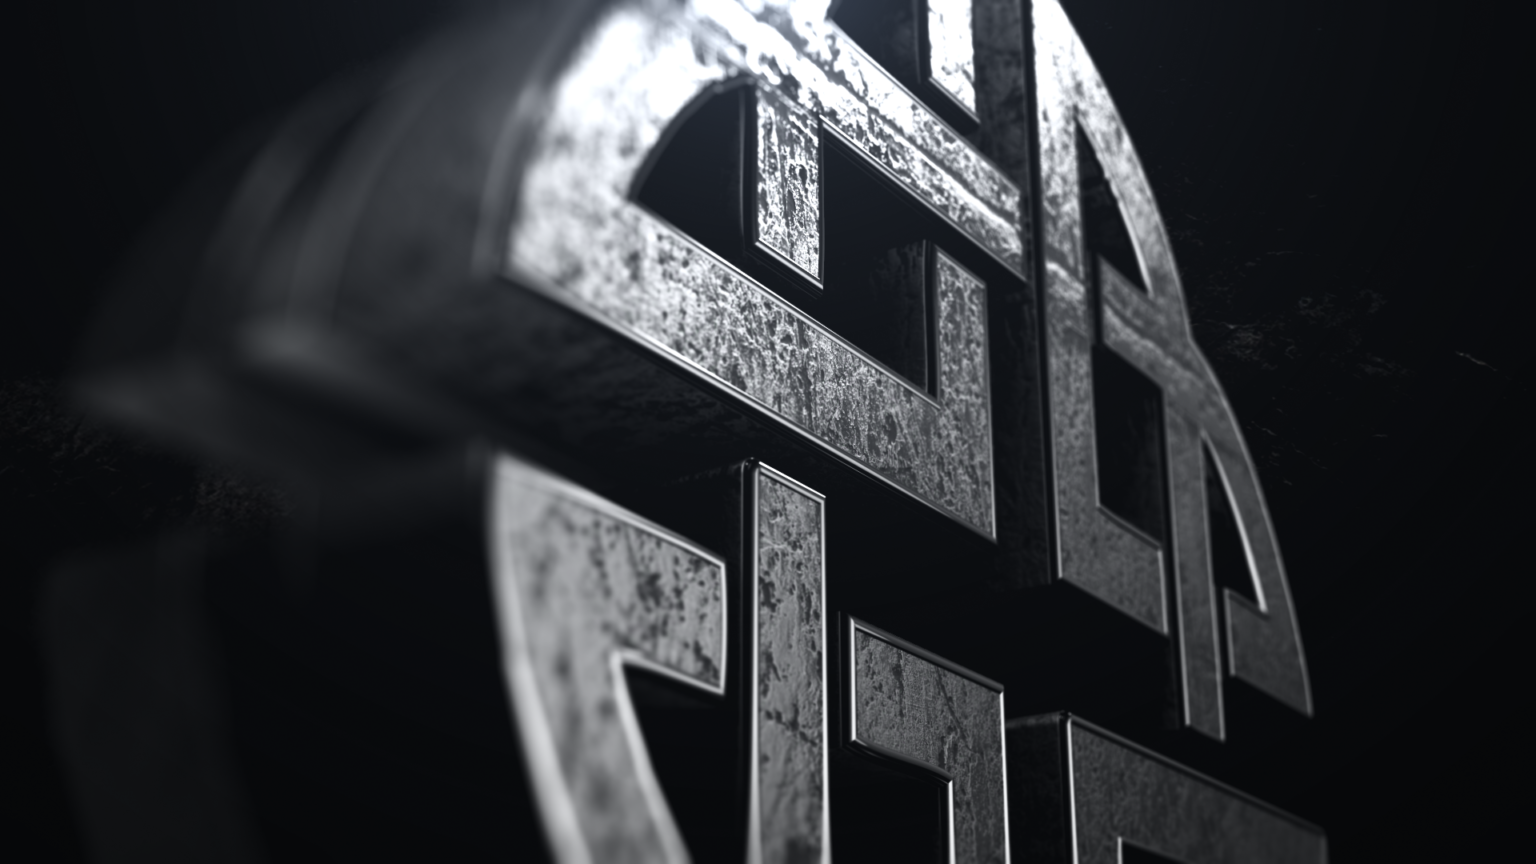 After Effects Element 3D Logo Intro Template 34 FREE DOWNLOAD RKMFX